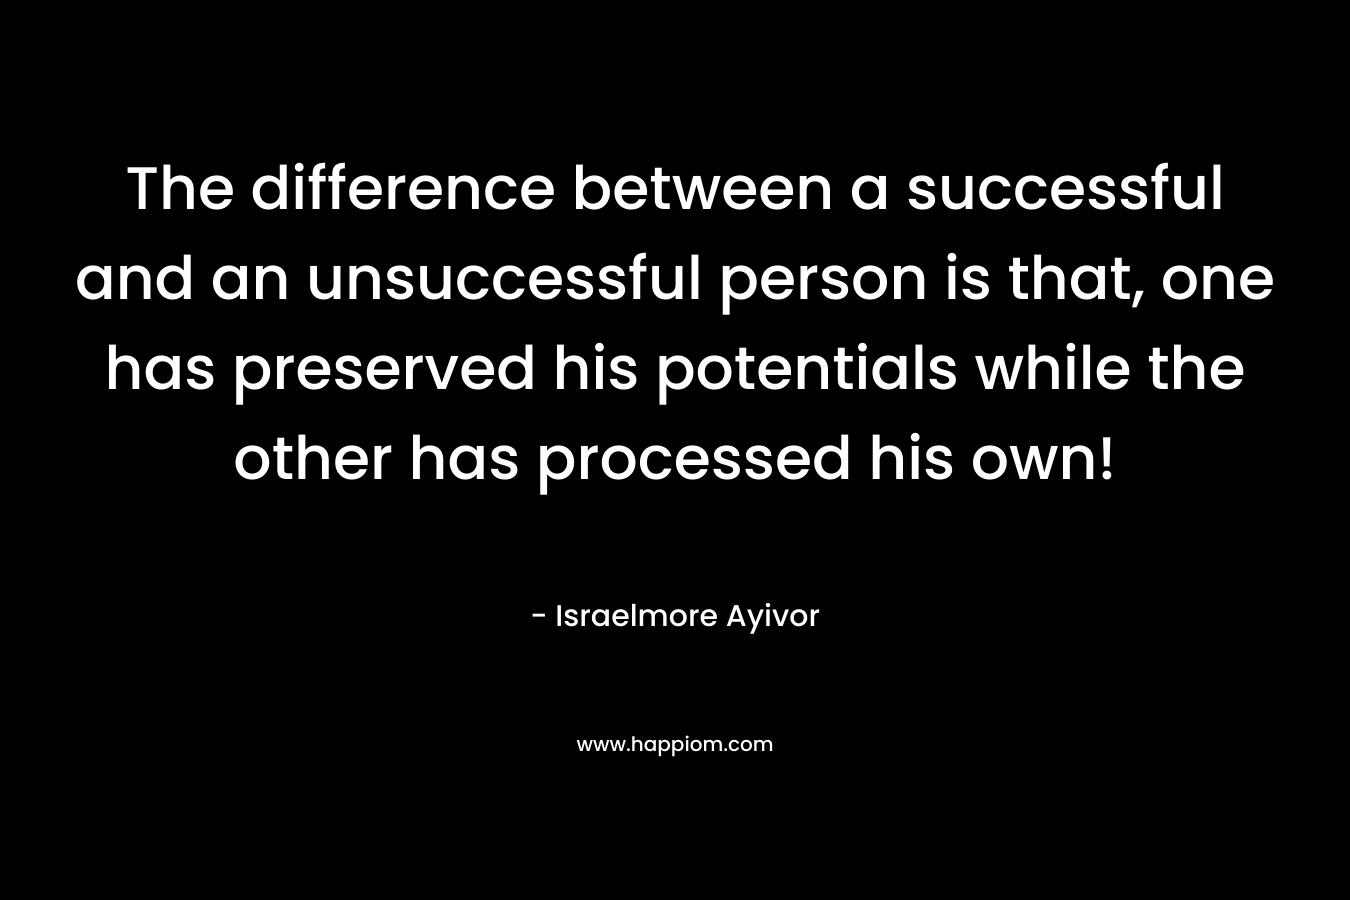 The difference between a successful and an unsuccessful person is that, one has preserved his potentials while the other has processed his own! – Israelmore Ayivor